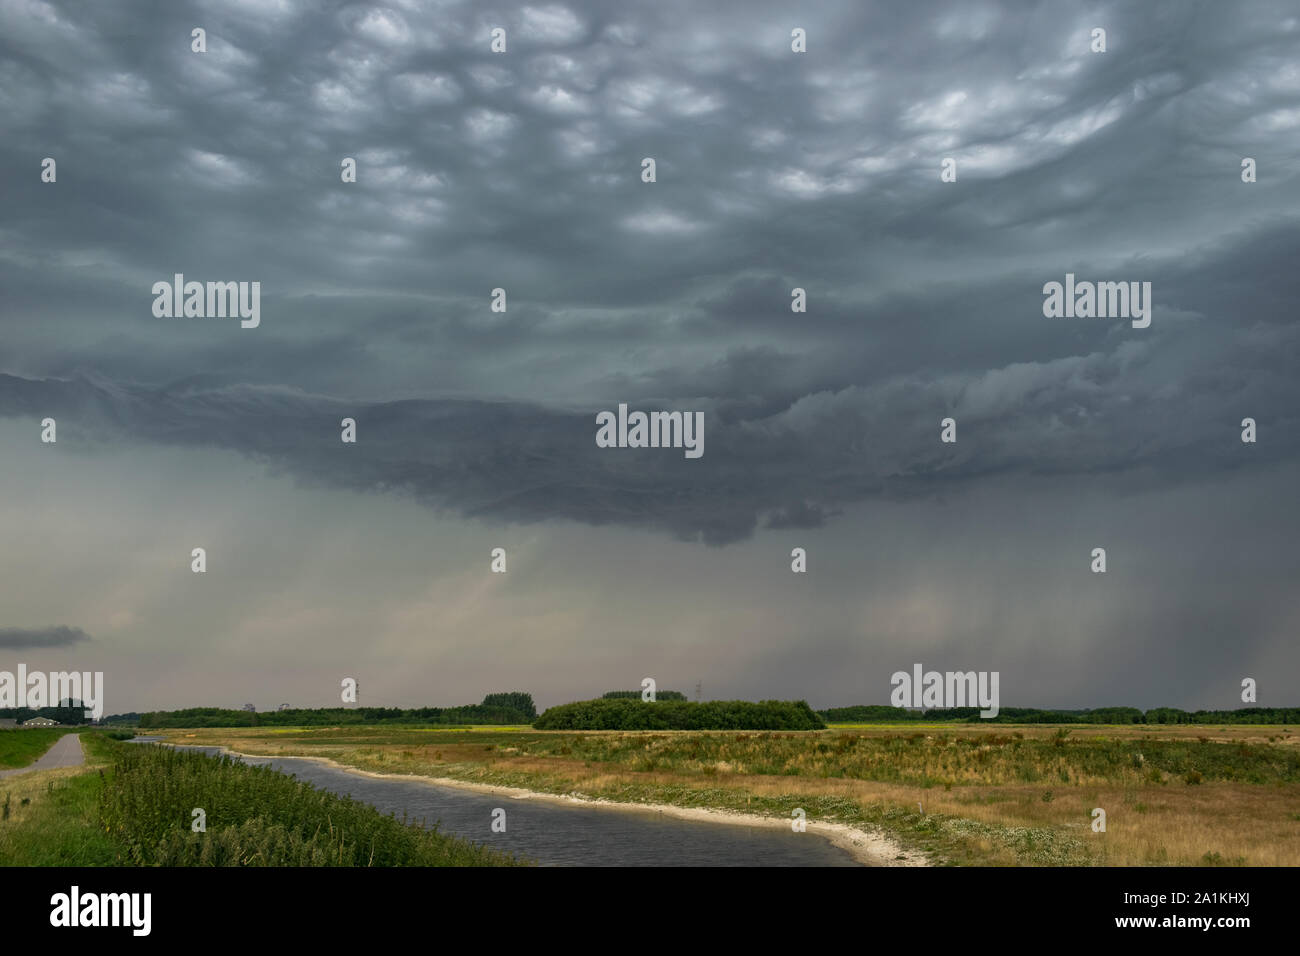 Dramatic thunderstorm clouds over the dutch countryside. These are called Altocumulus undulatus asperatus clouds. Stock Photo